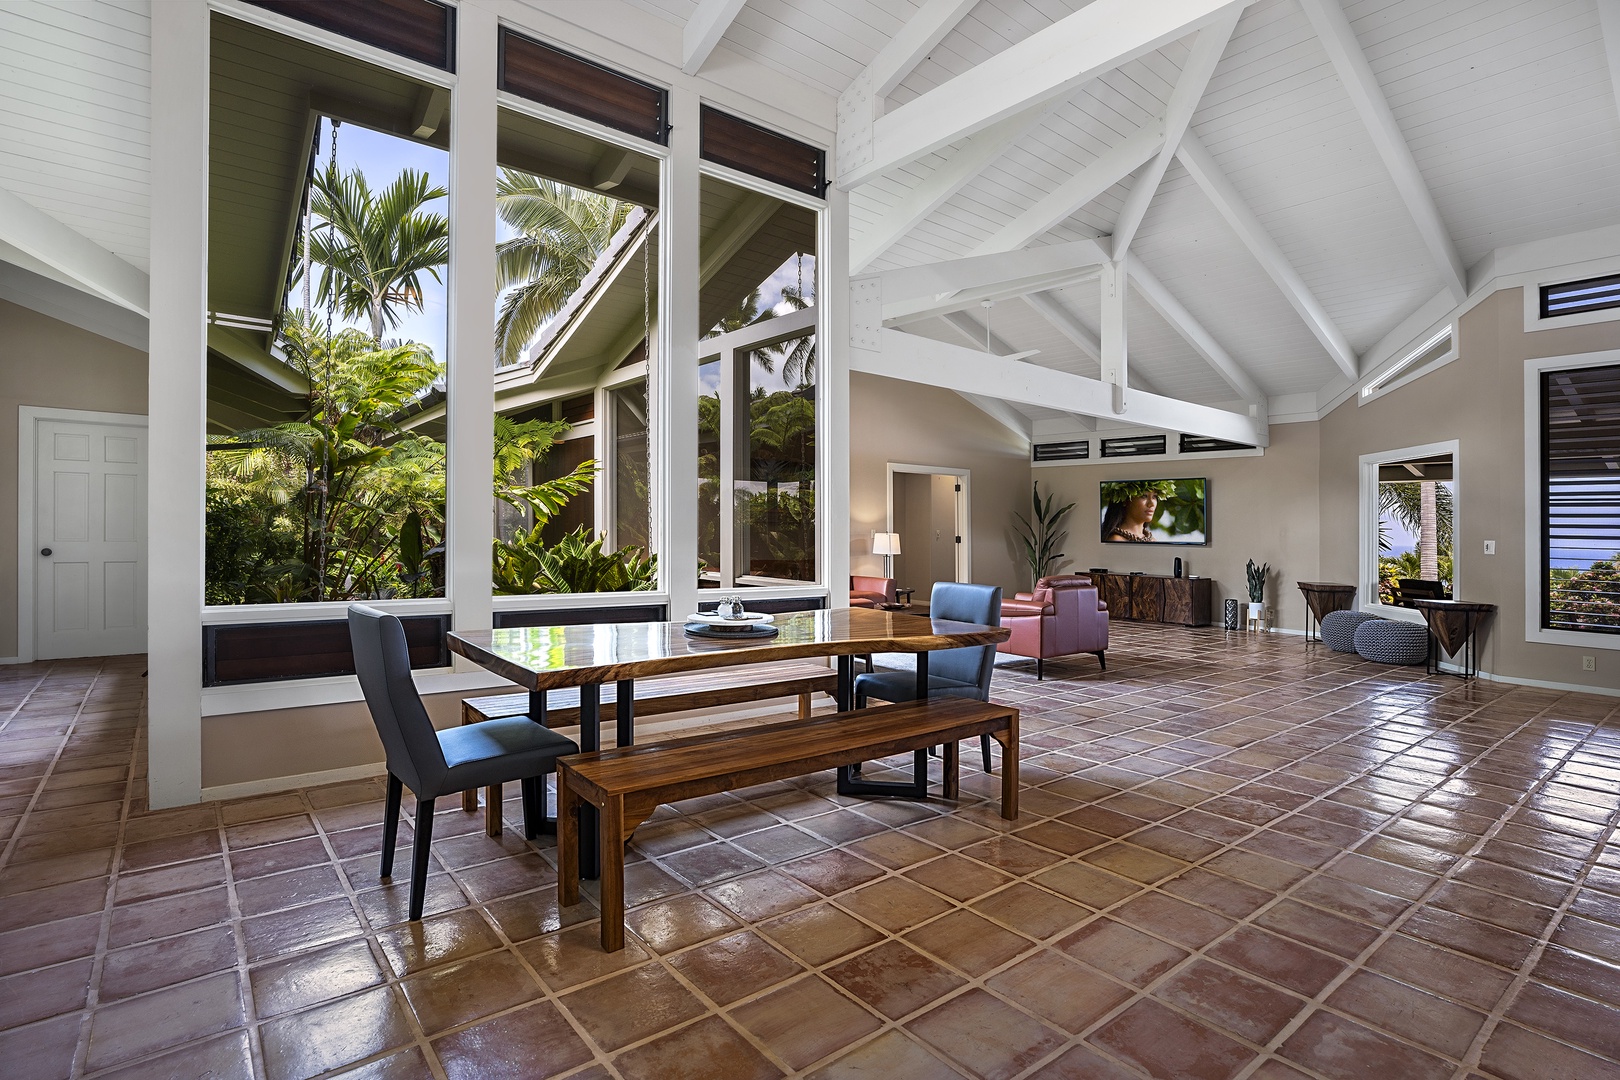 Kailua Kona Vacation Rentals, Pineapple House - Dining for 6 aside the water feature